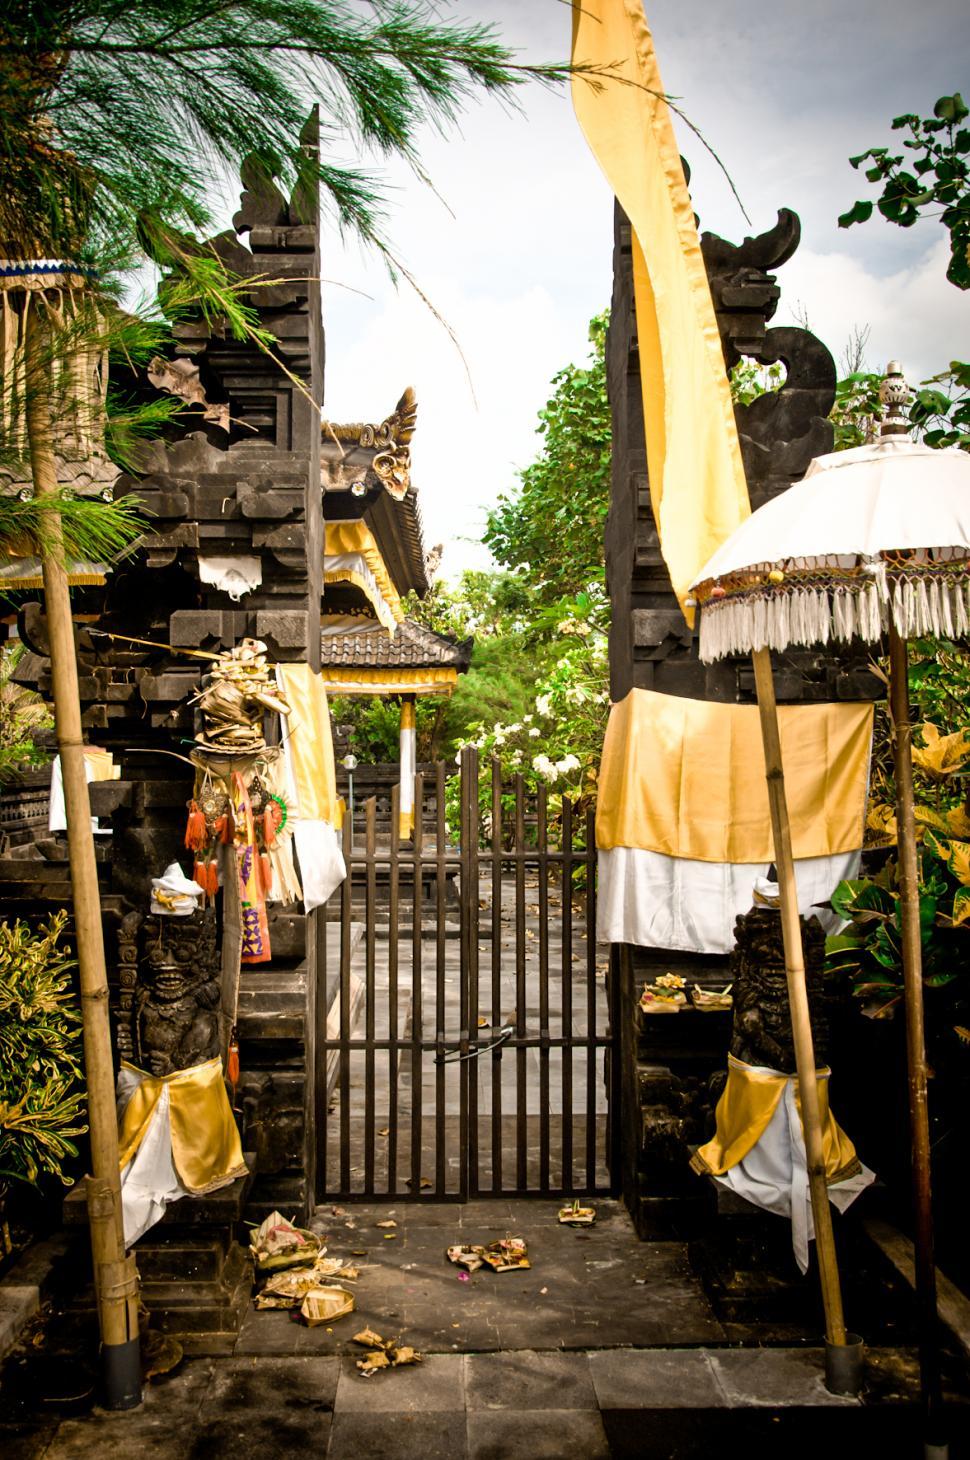 Free Image of Temple in Bali 